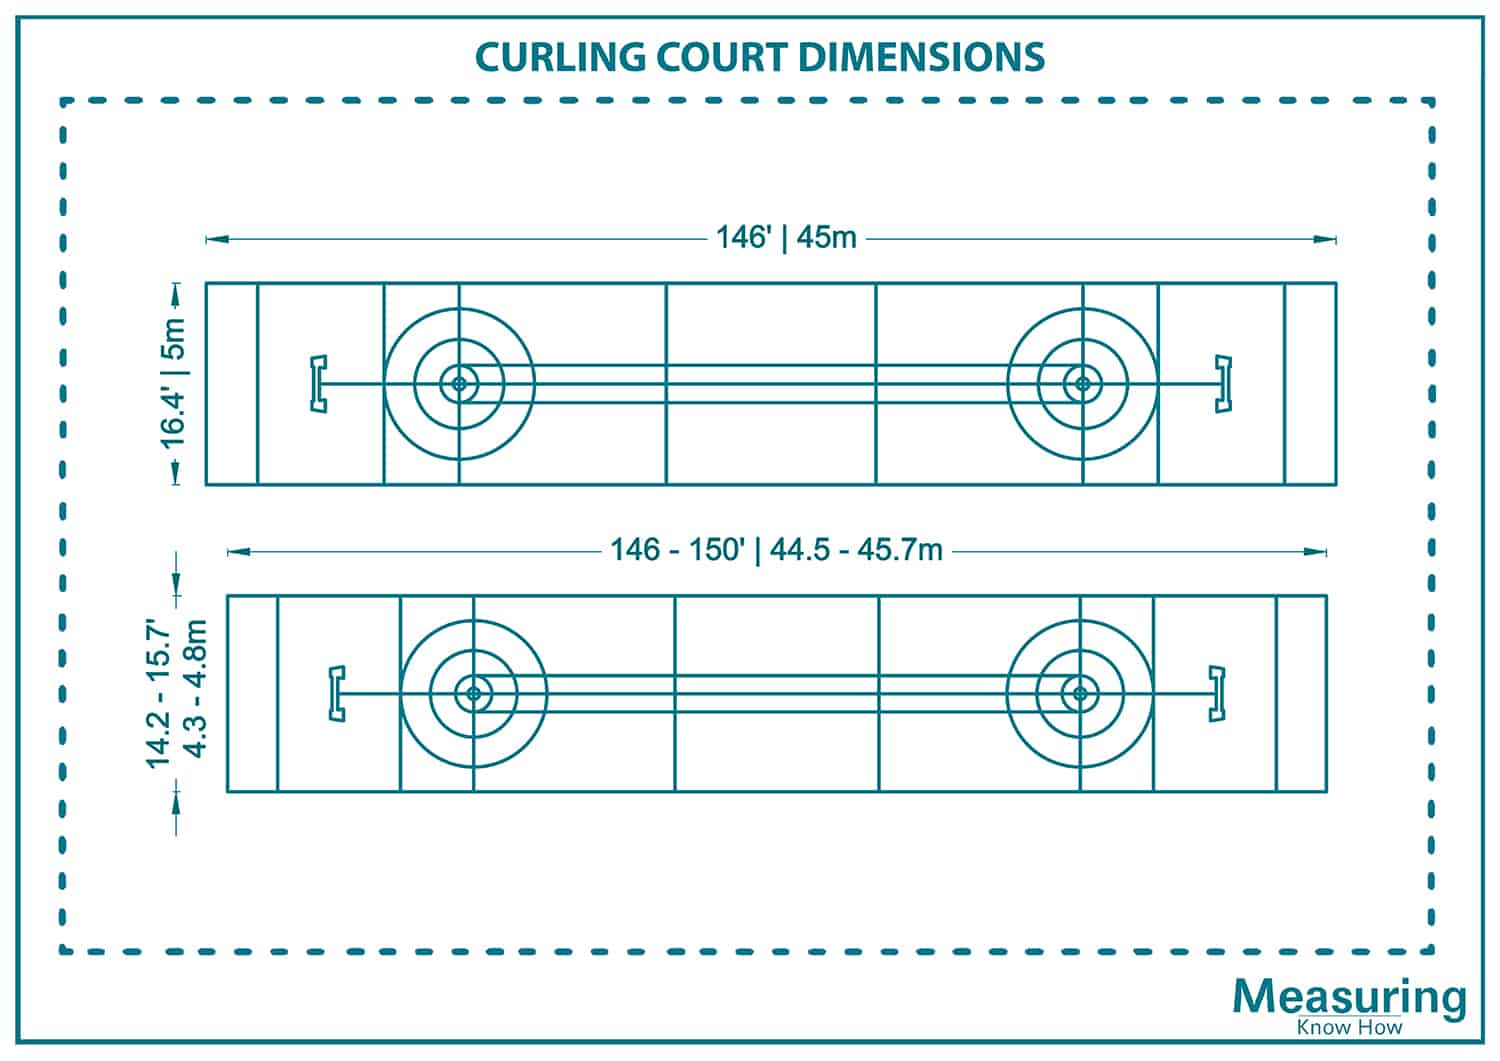 Curling court dimensions - Drawings